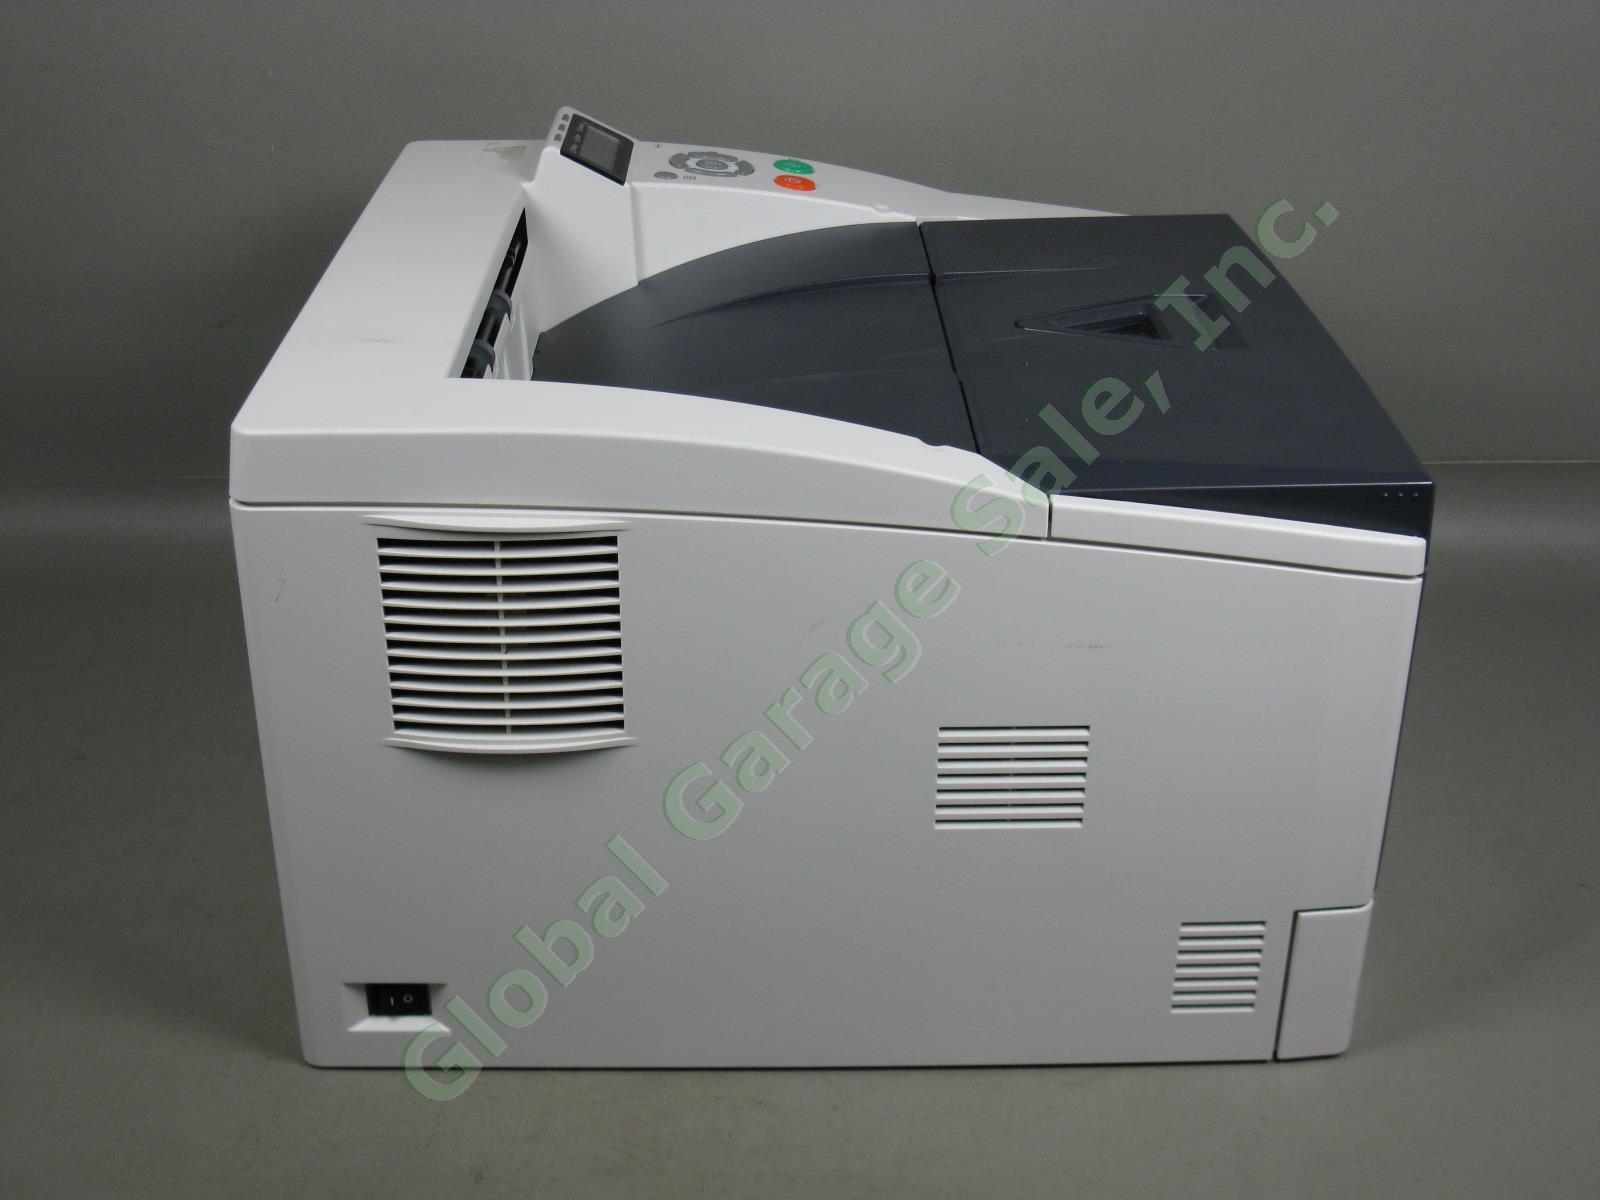 Kyocera Ecosys FS-1370DN Workgroup Network Laser Printer w/Toner 14509 Pages EXC 6